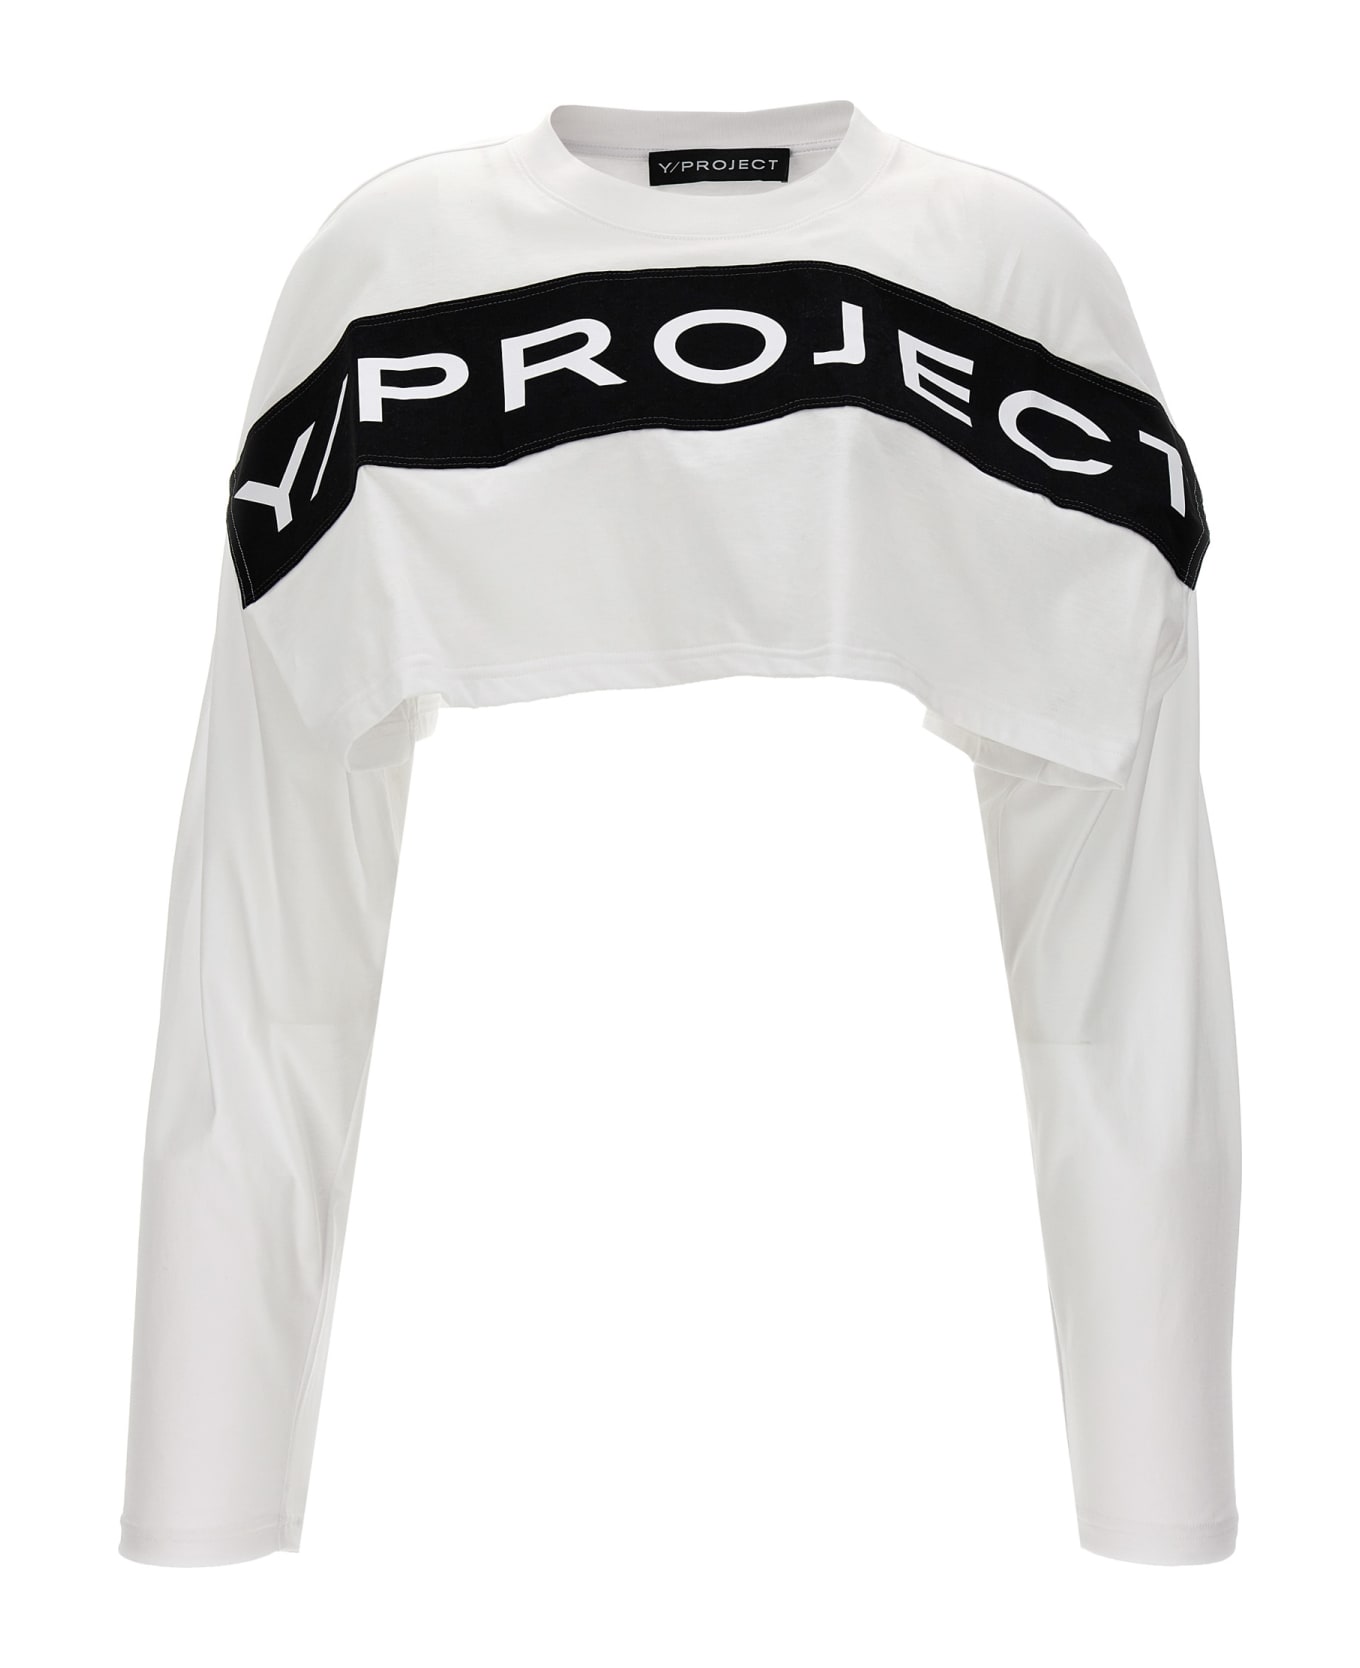 Y/Project Logo Crop T-shirt - White